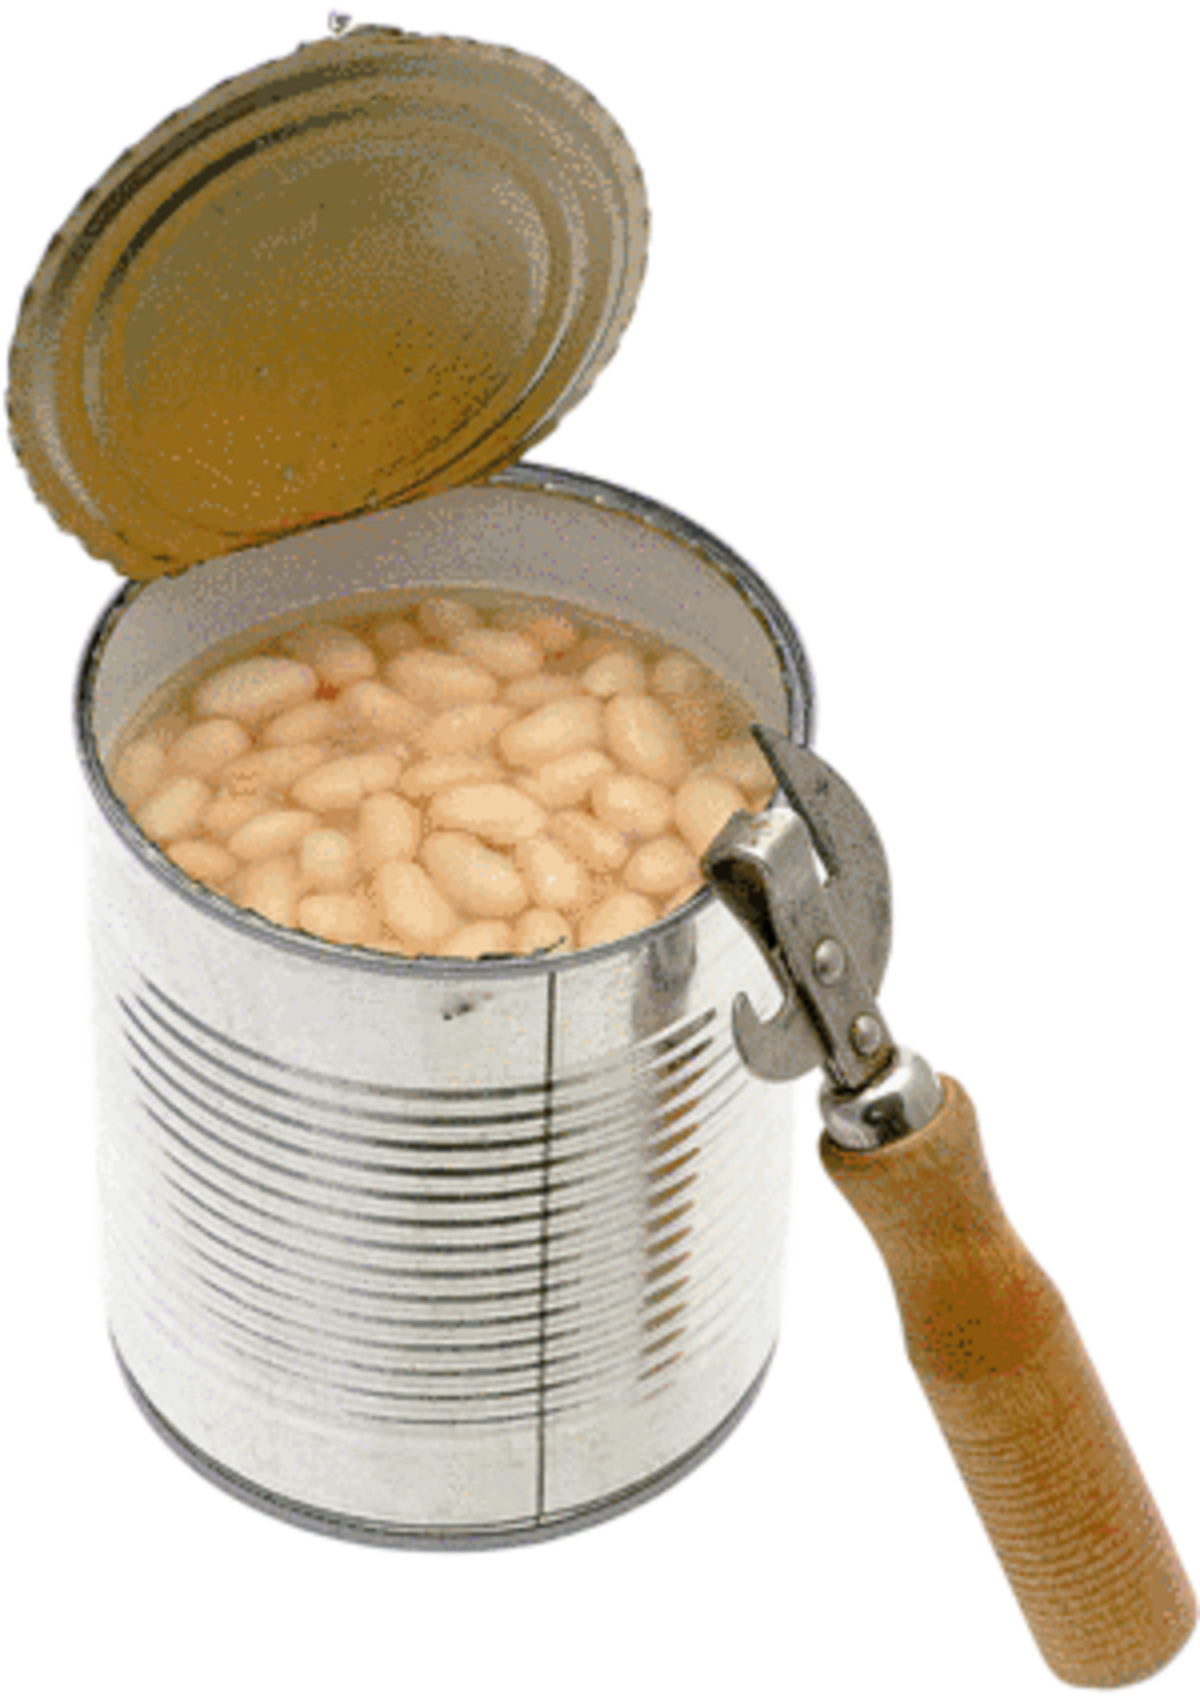 Sodium Value Check for Canned Food HORIBA